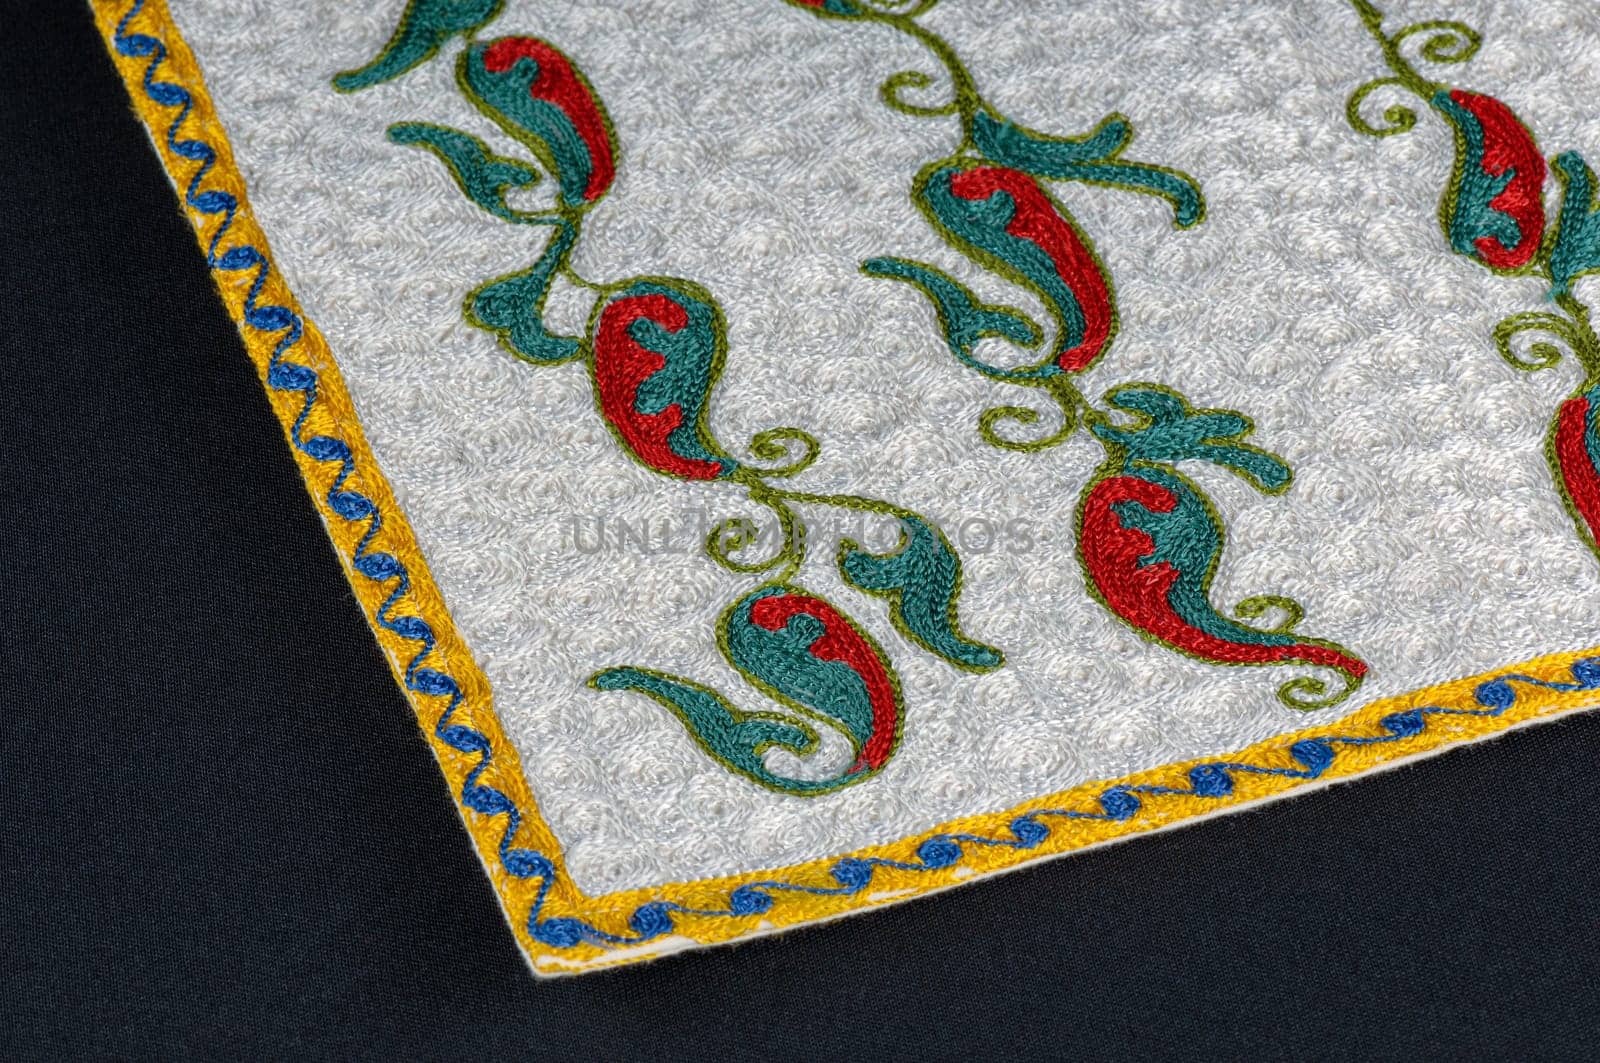 A closeup shot of national ornaments and patterns of Central Asia on a piece of fabric